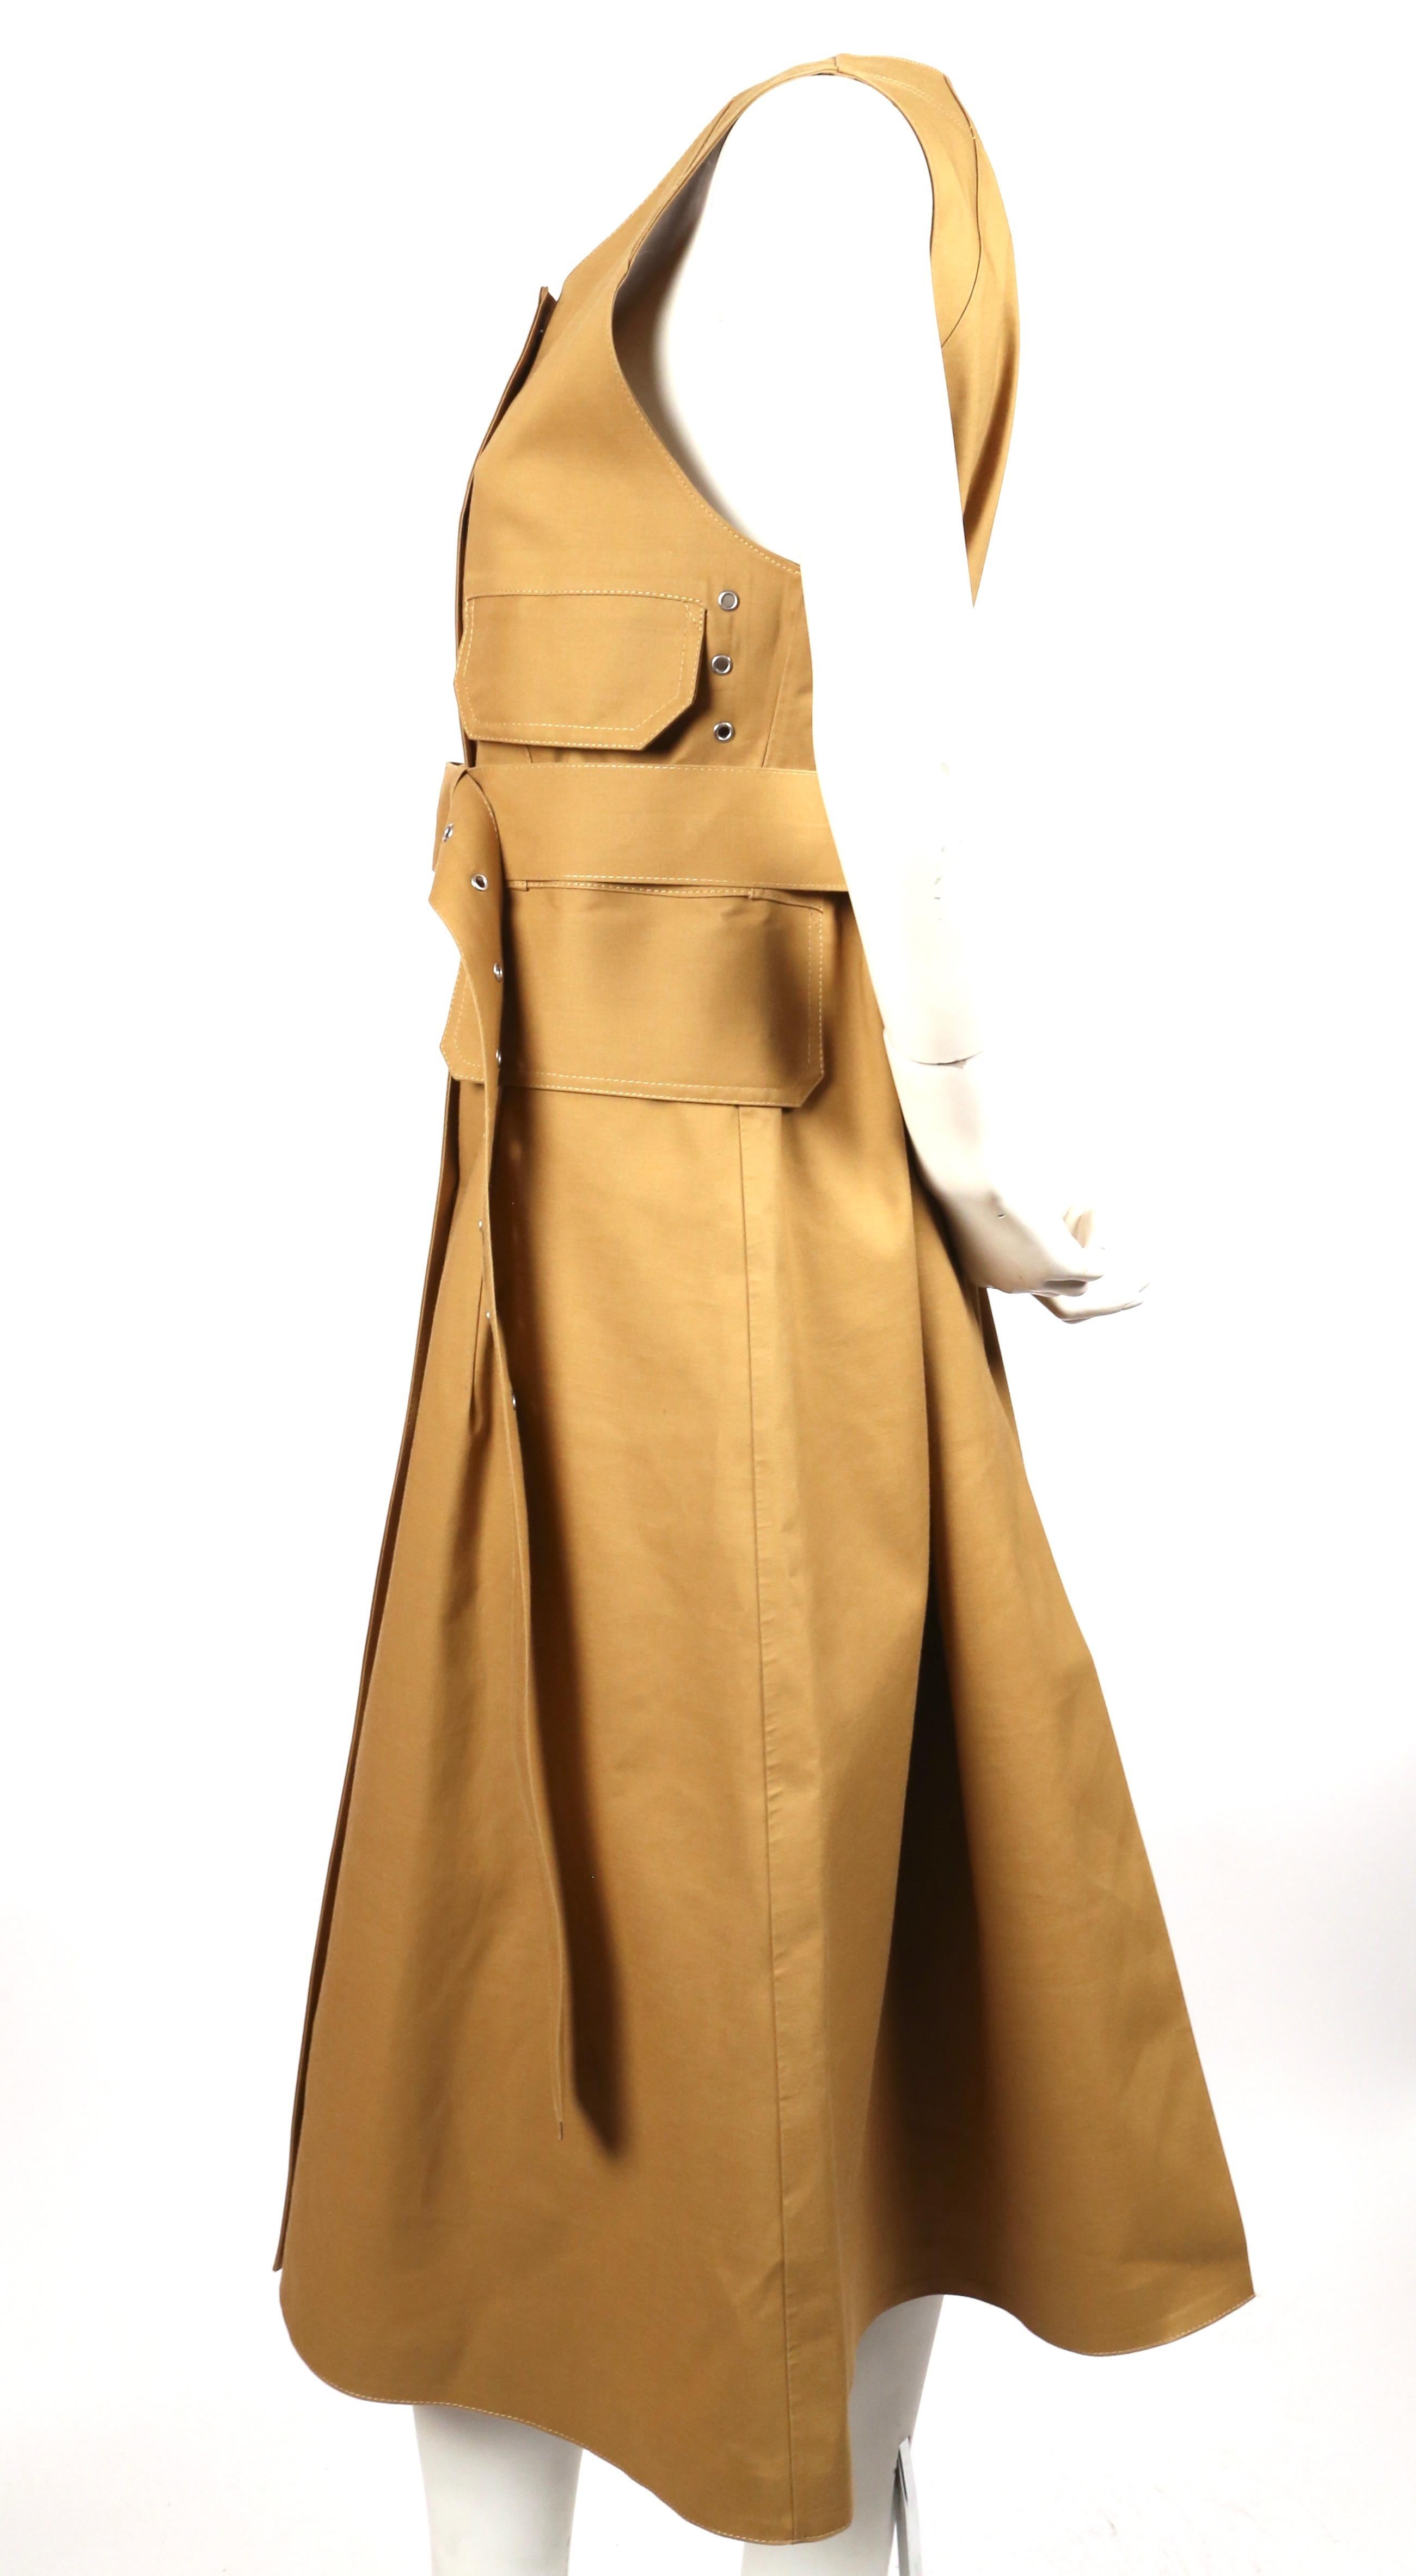 Sleeveless, tan, cotton mackintosh with matching belt designed by Phoebe Philo for Celine exactly as seen on the fall 2016 runway. Very rare piece. Labeled a French size 38. Approximate measurements: shoulders 14